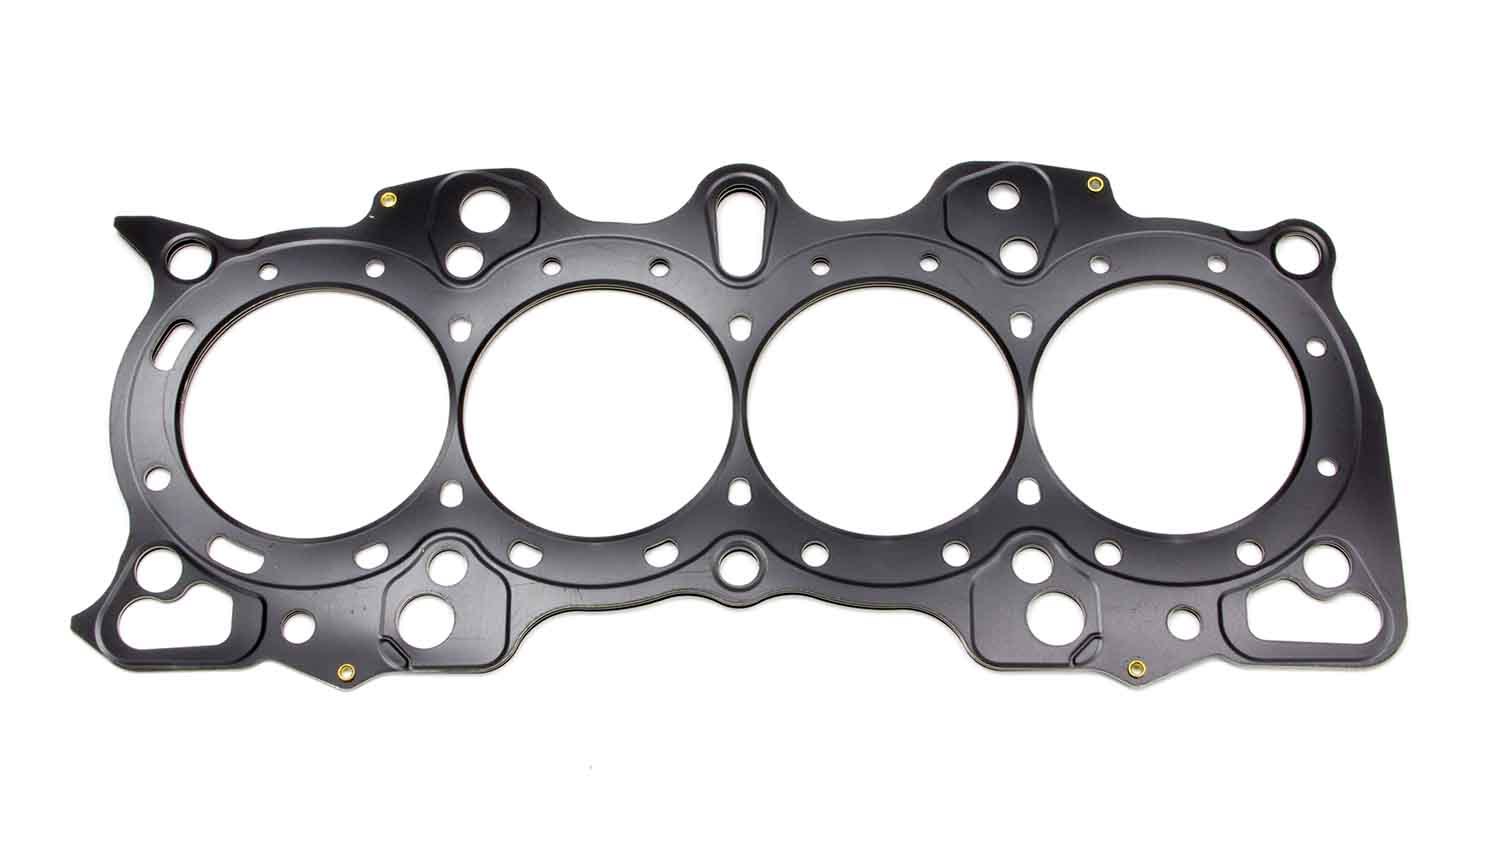 Cometic Gaskets C4194-030 Cylinder Head Gasket, 85.0 mm Bore, 0.030 in Compression Thickness, Multi-Layer Steel, Honda 4-Cylinder, Each